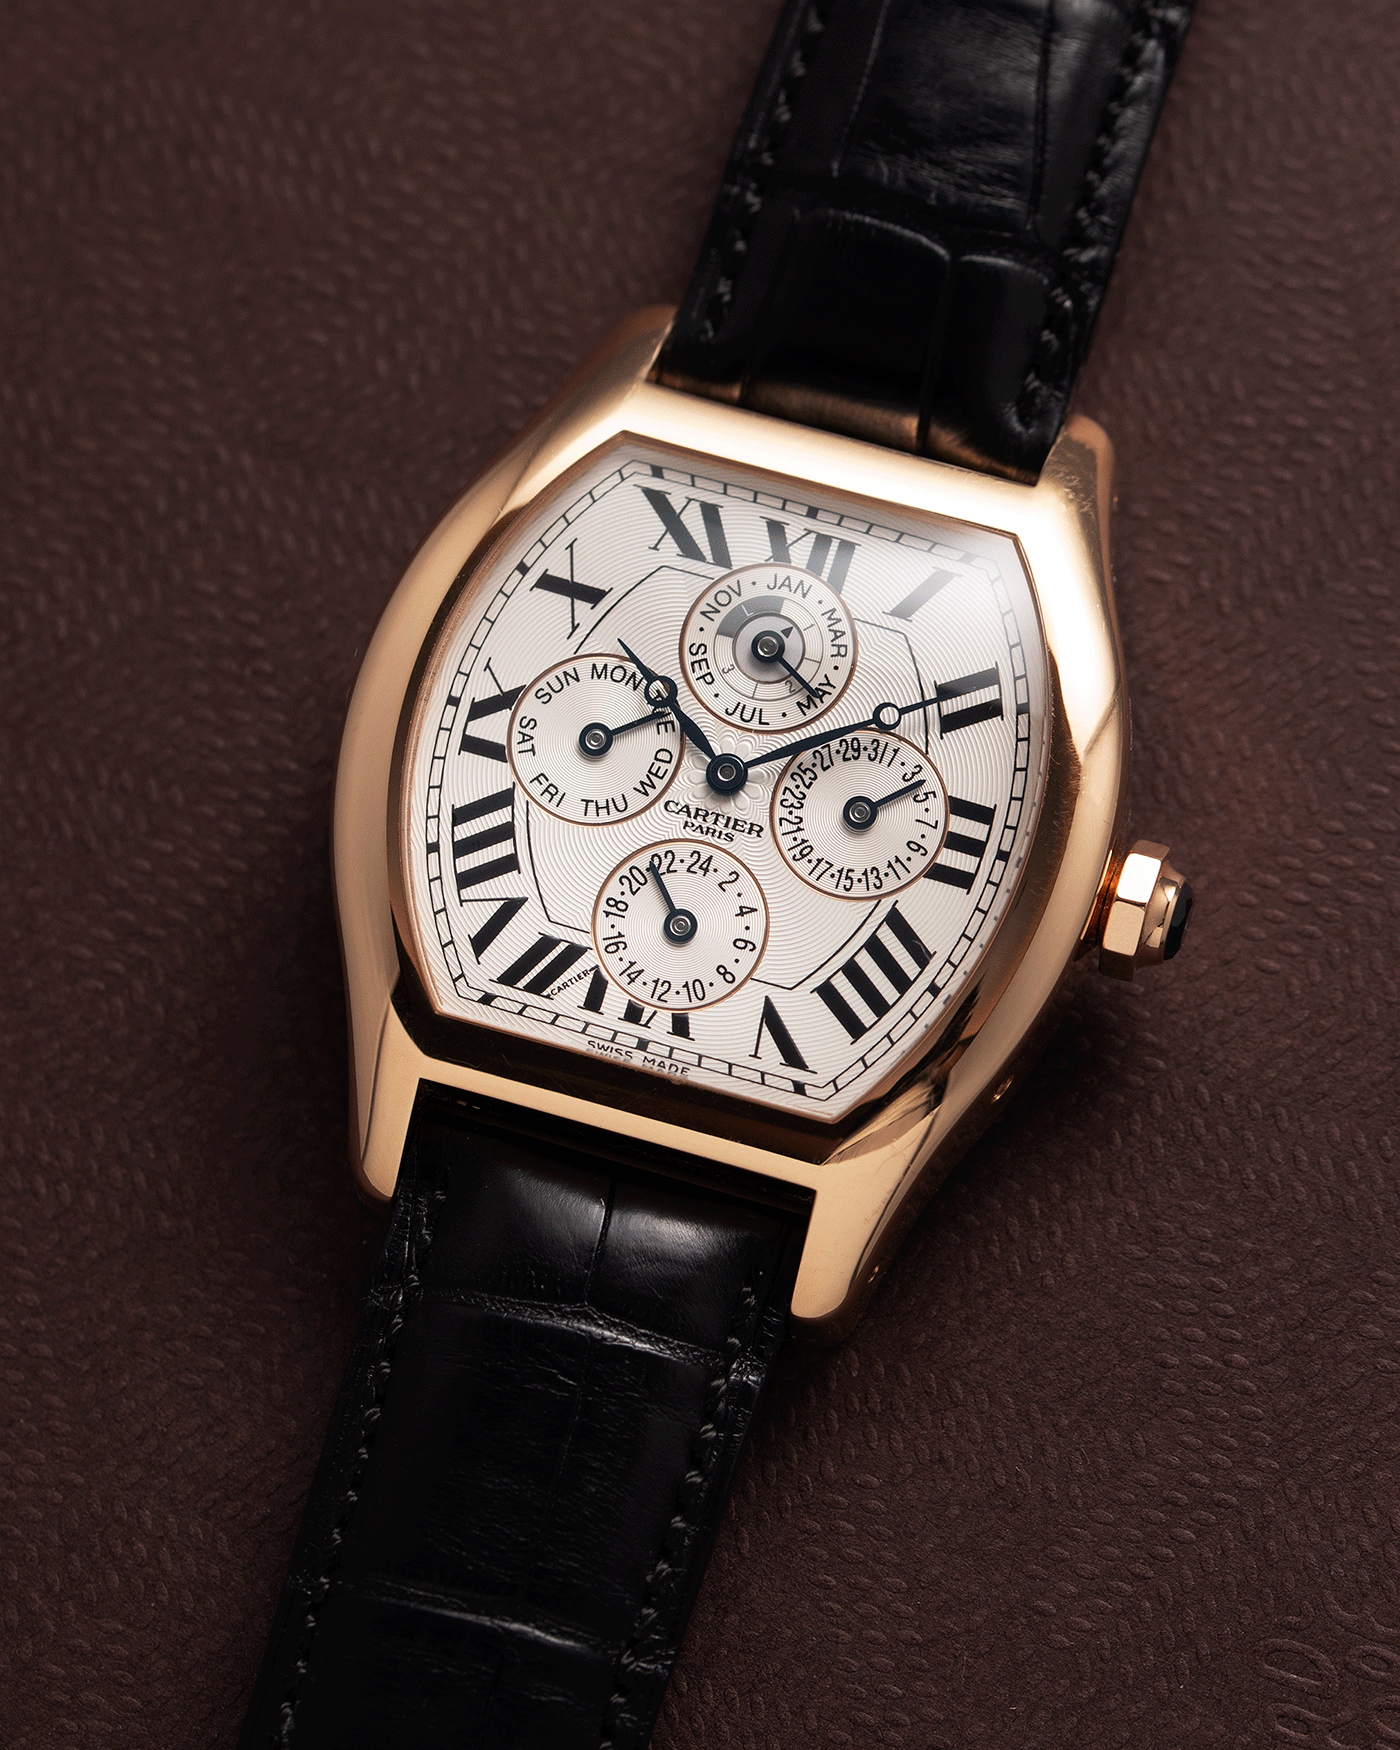 Brand: Cartier Year: 2005 Model: CPCP Collection Prive Tortue Perpetual Calendar XL Reference: 2666 Material: 18k Rose Gold Movement: Cal. 9421MC Case Diameter: 42.5mm x 34mm Strap: Cartier Black Alligator with 18k Rose Gold Cartier Deployant